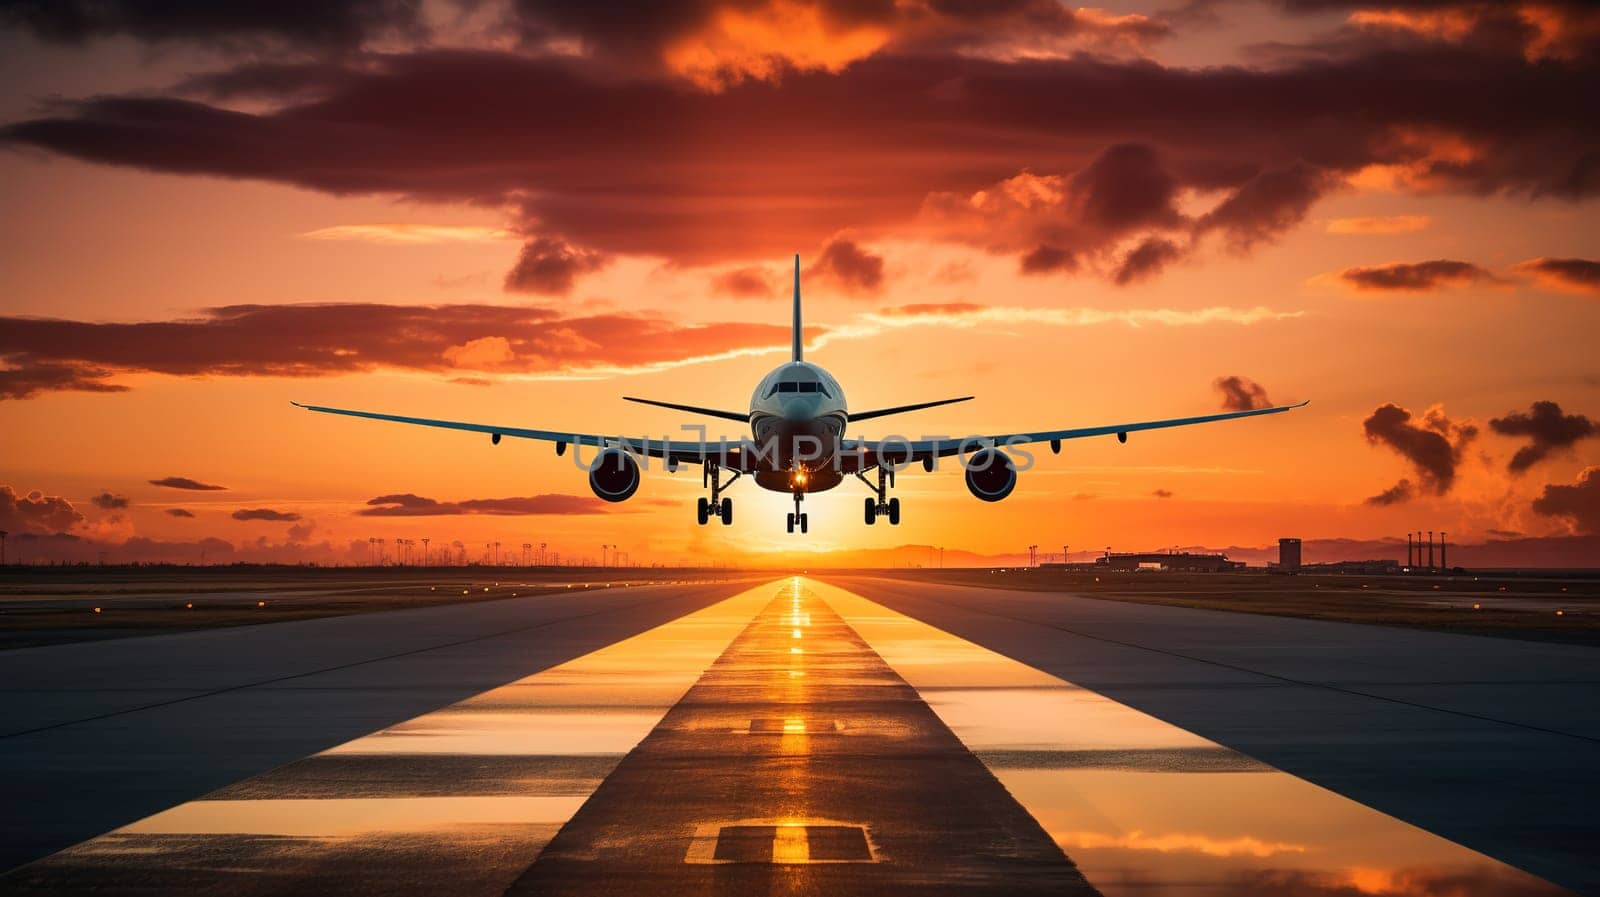 Airplane landing at the airport during summer sunset, transportation concept by Kadula